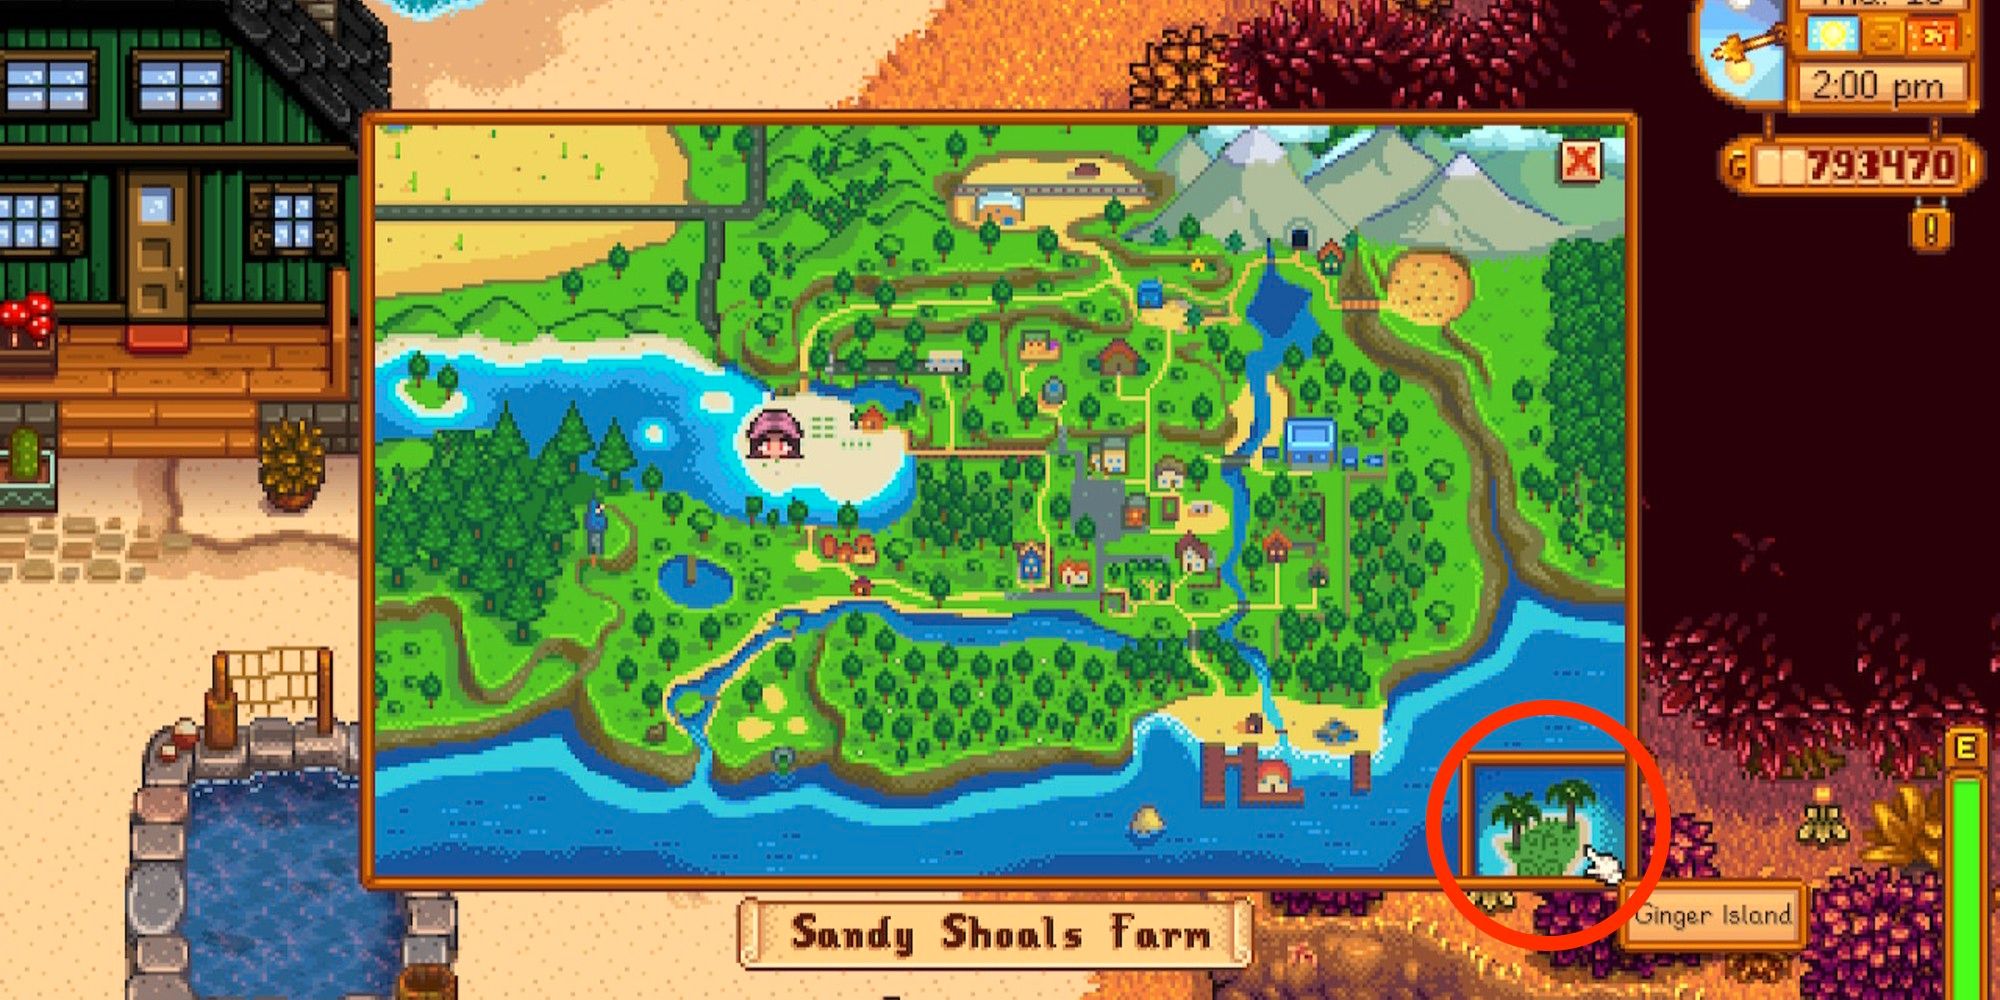 Stardew Valley Map With Ginger Island Circled